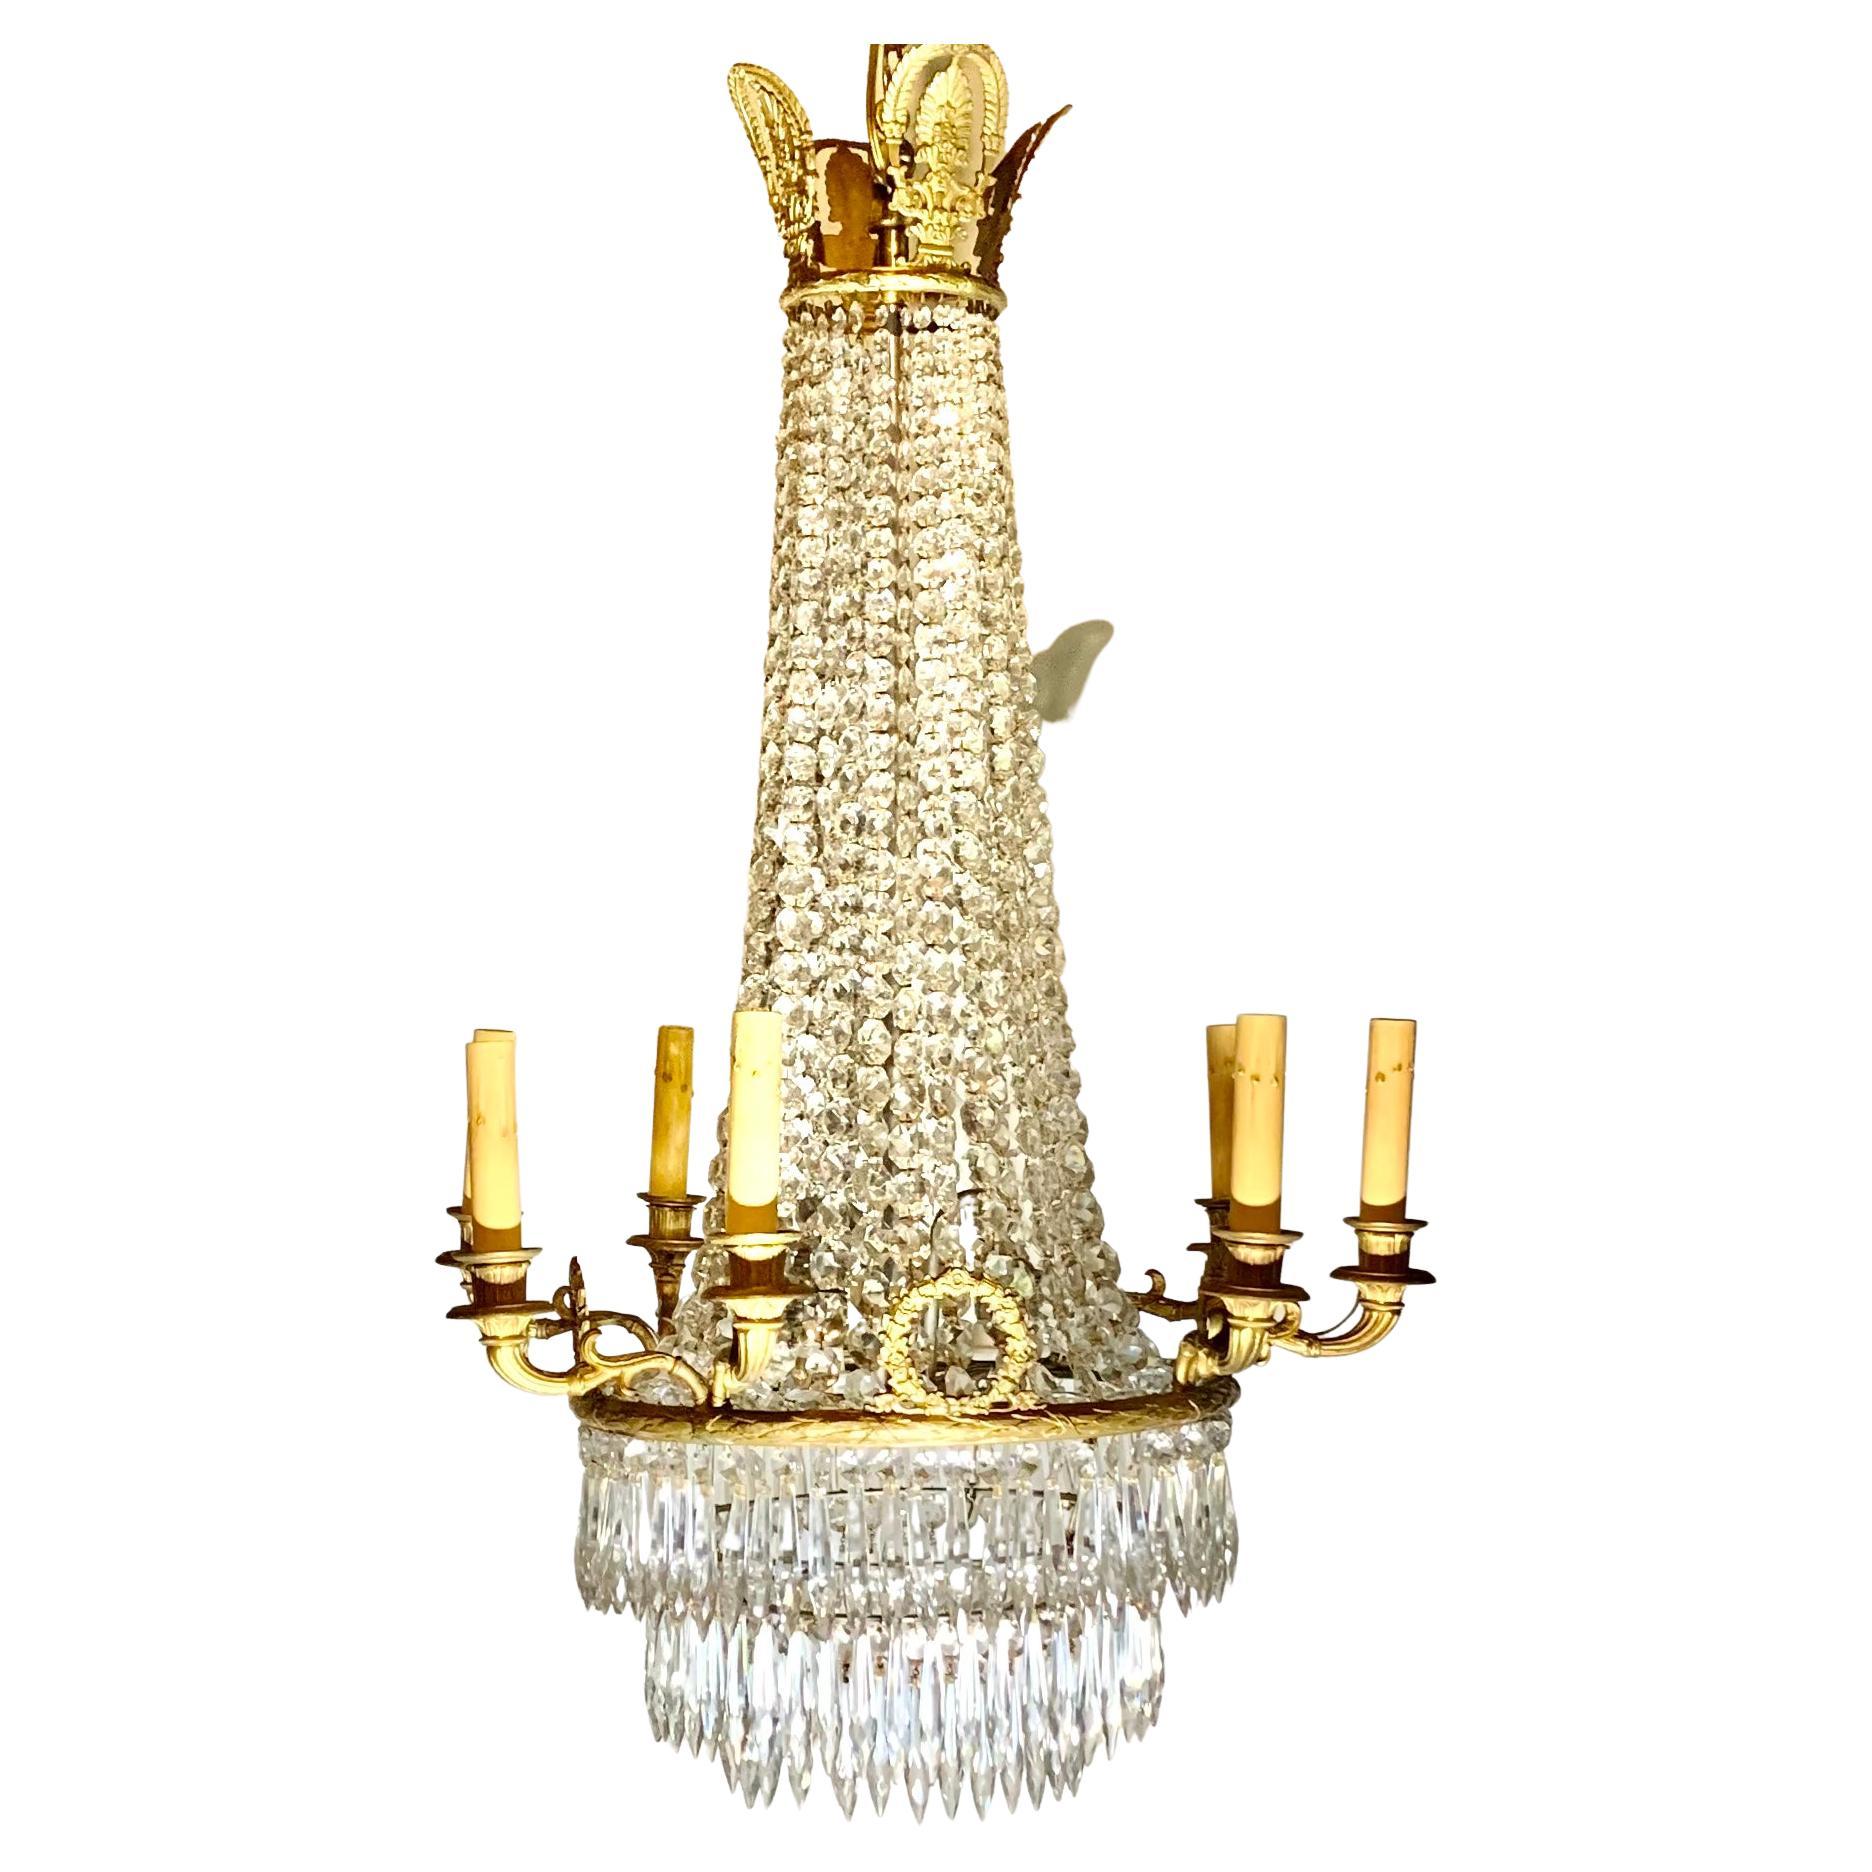 19th Century French Neoclassical Gilt Bronze and Crystal Eleven Light Chandelier For Sale